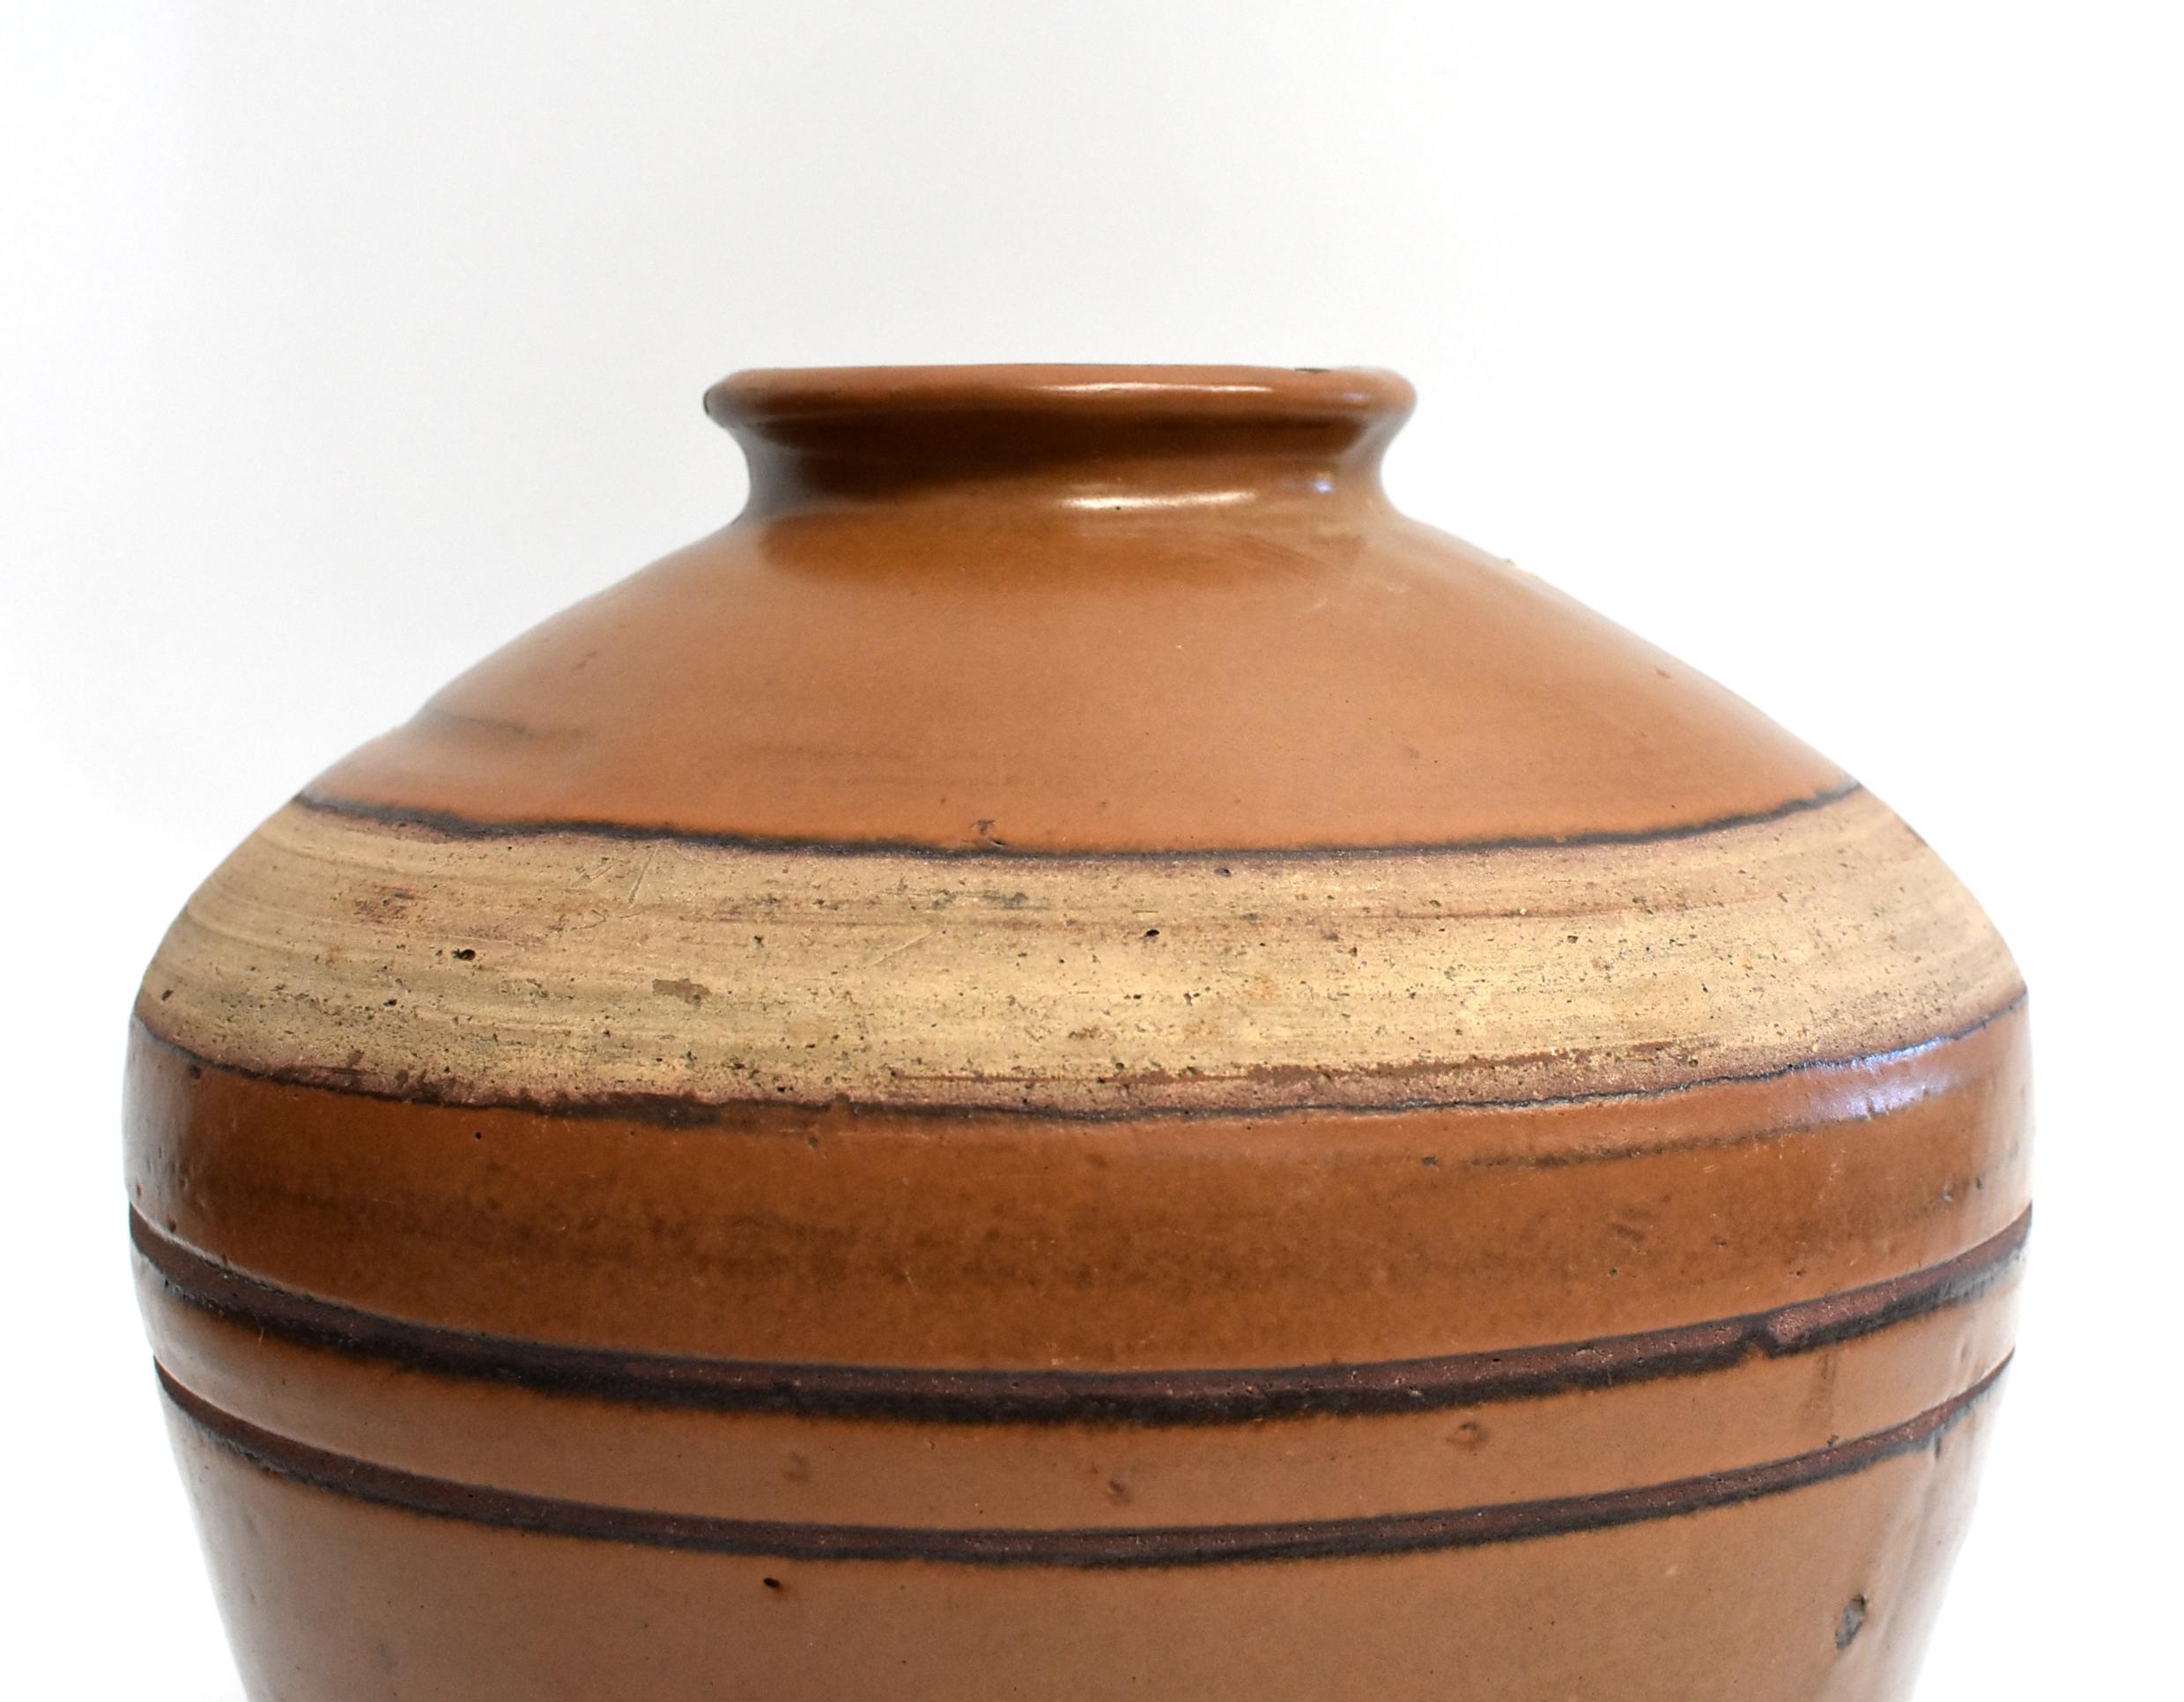 Glazed Large Antique Brown Jar with Black Rings, Handmade Chinese Pottery